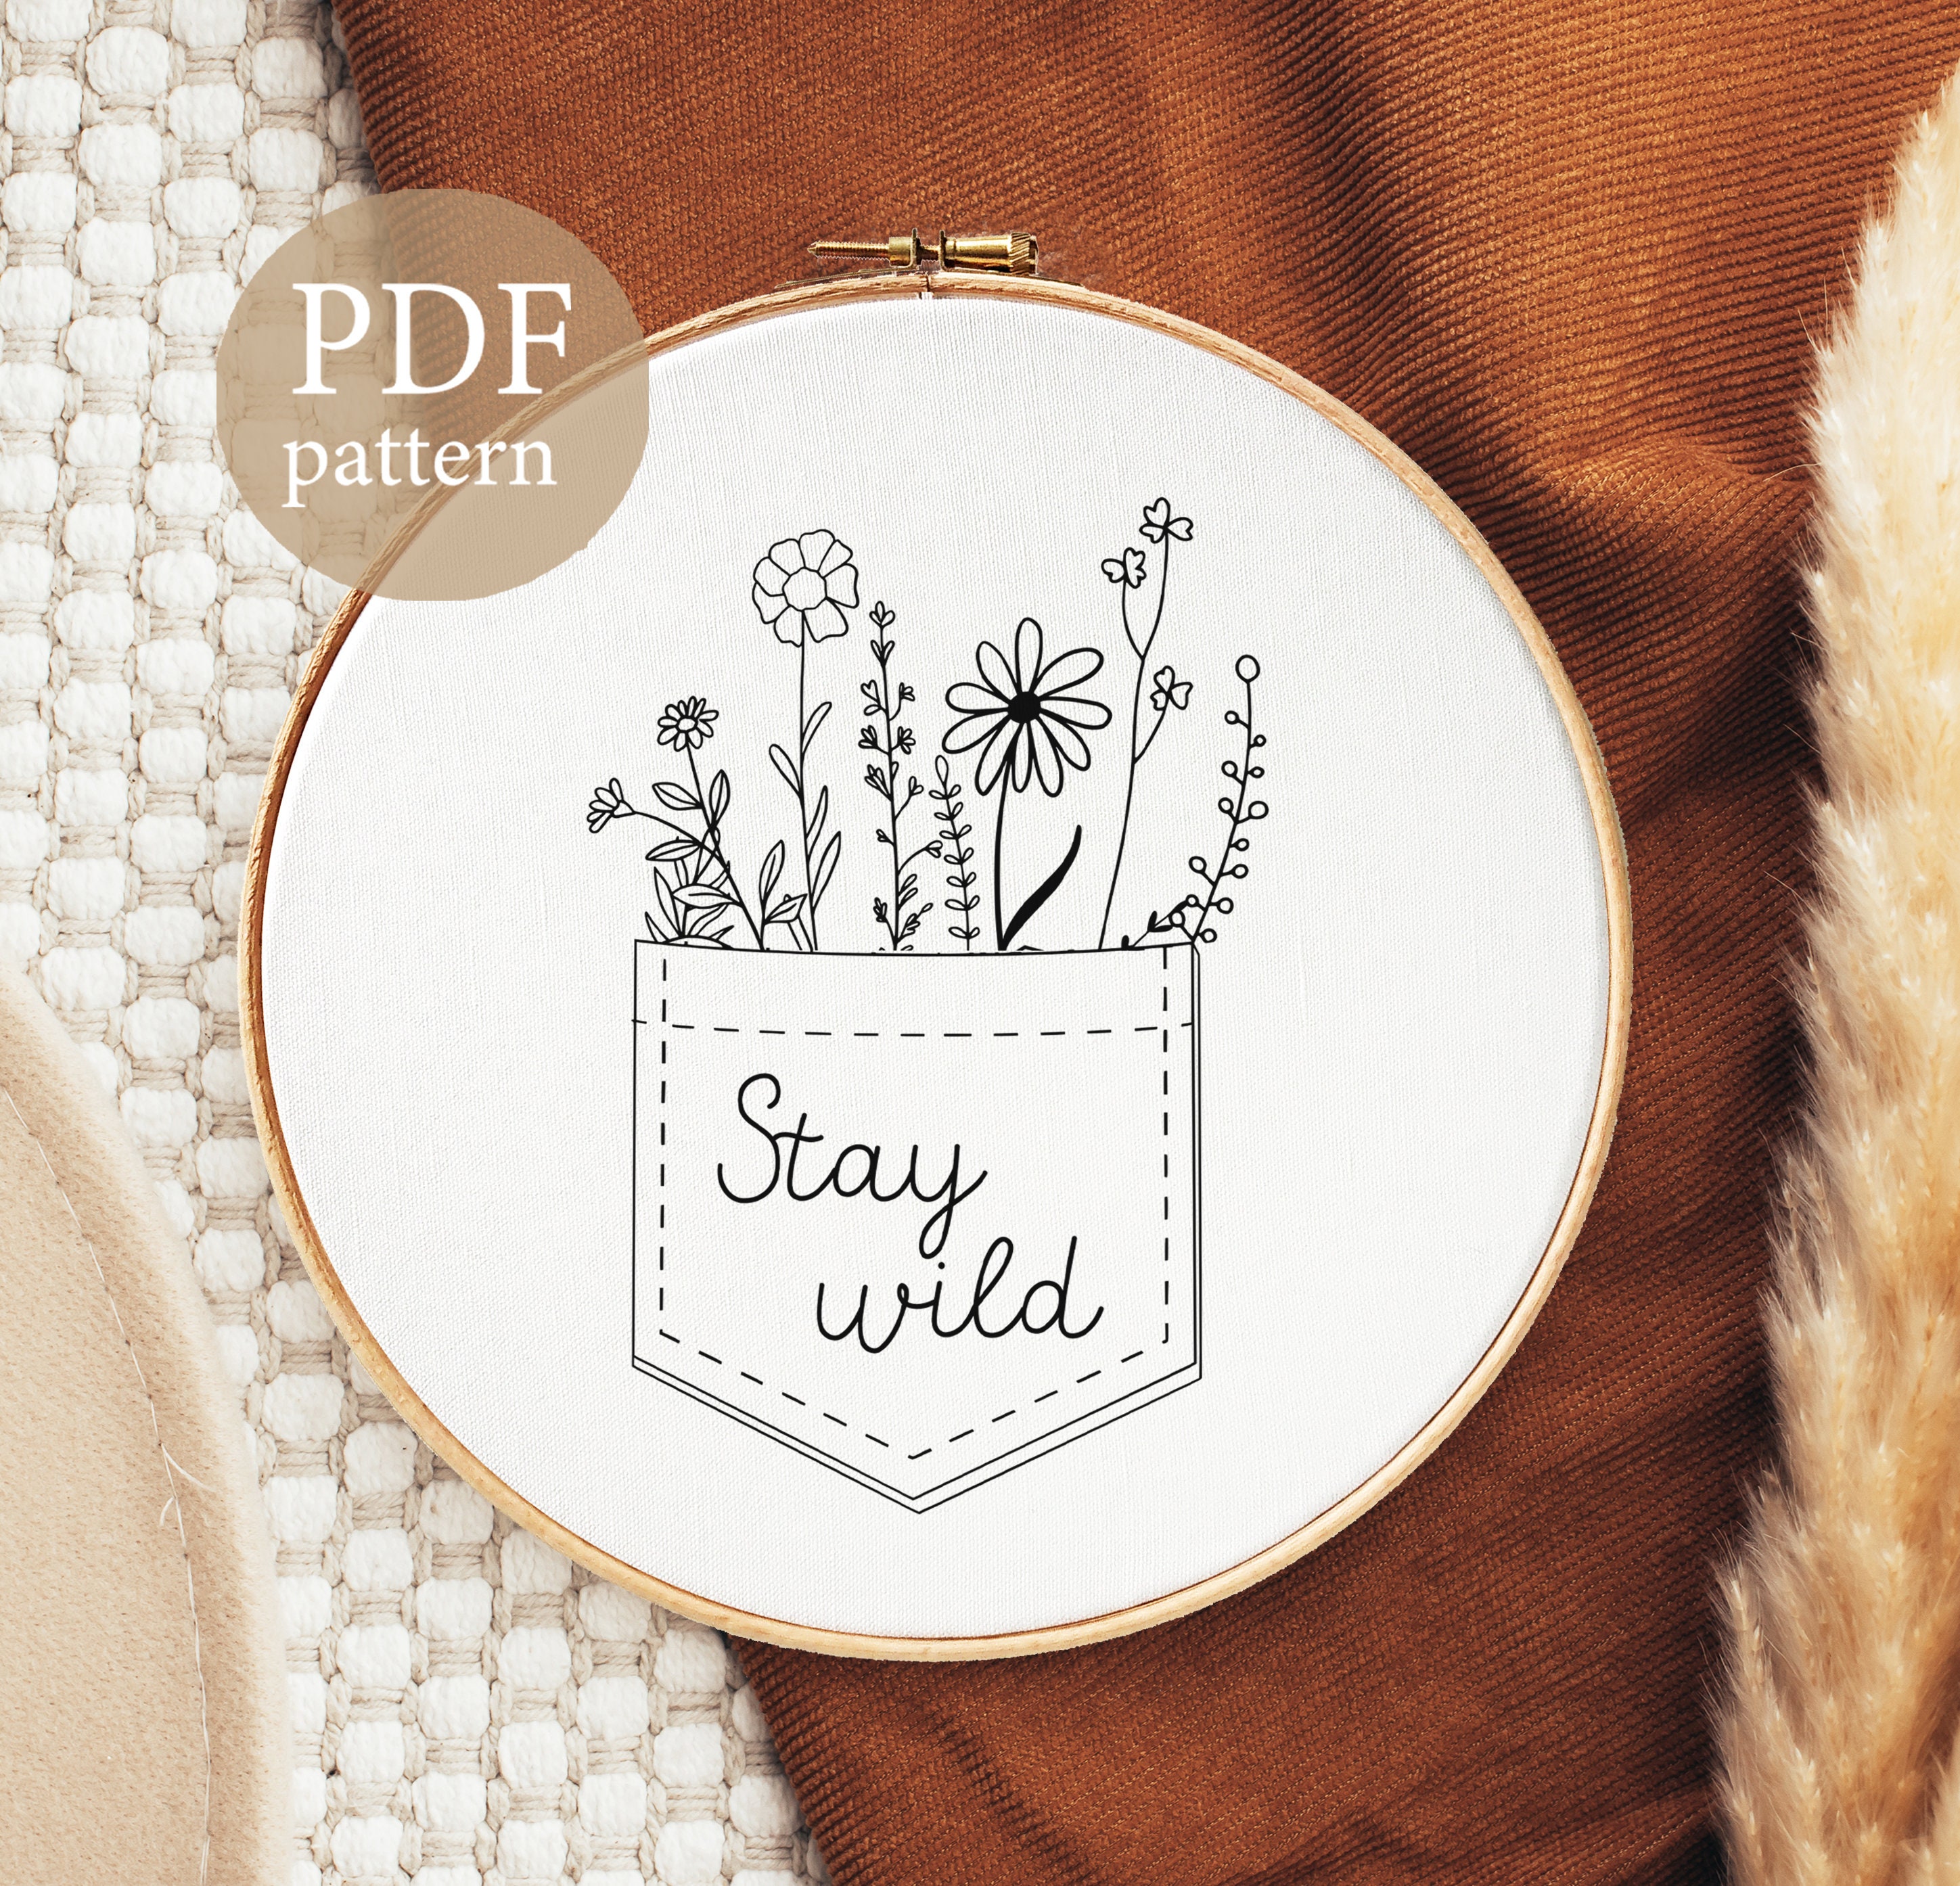 Hand Embroidery Floral Wreath PDF Pattern File, Beginner